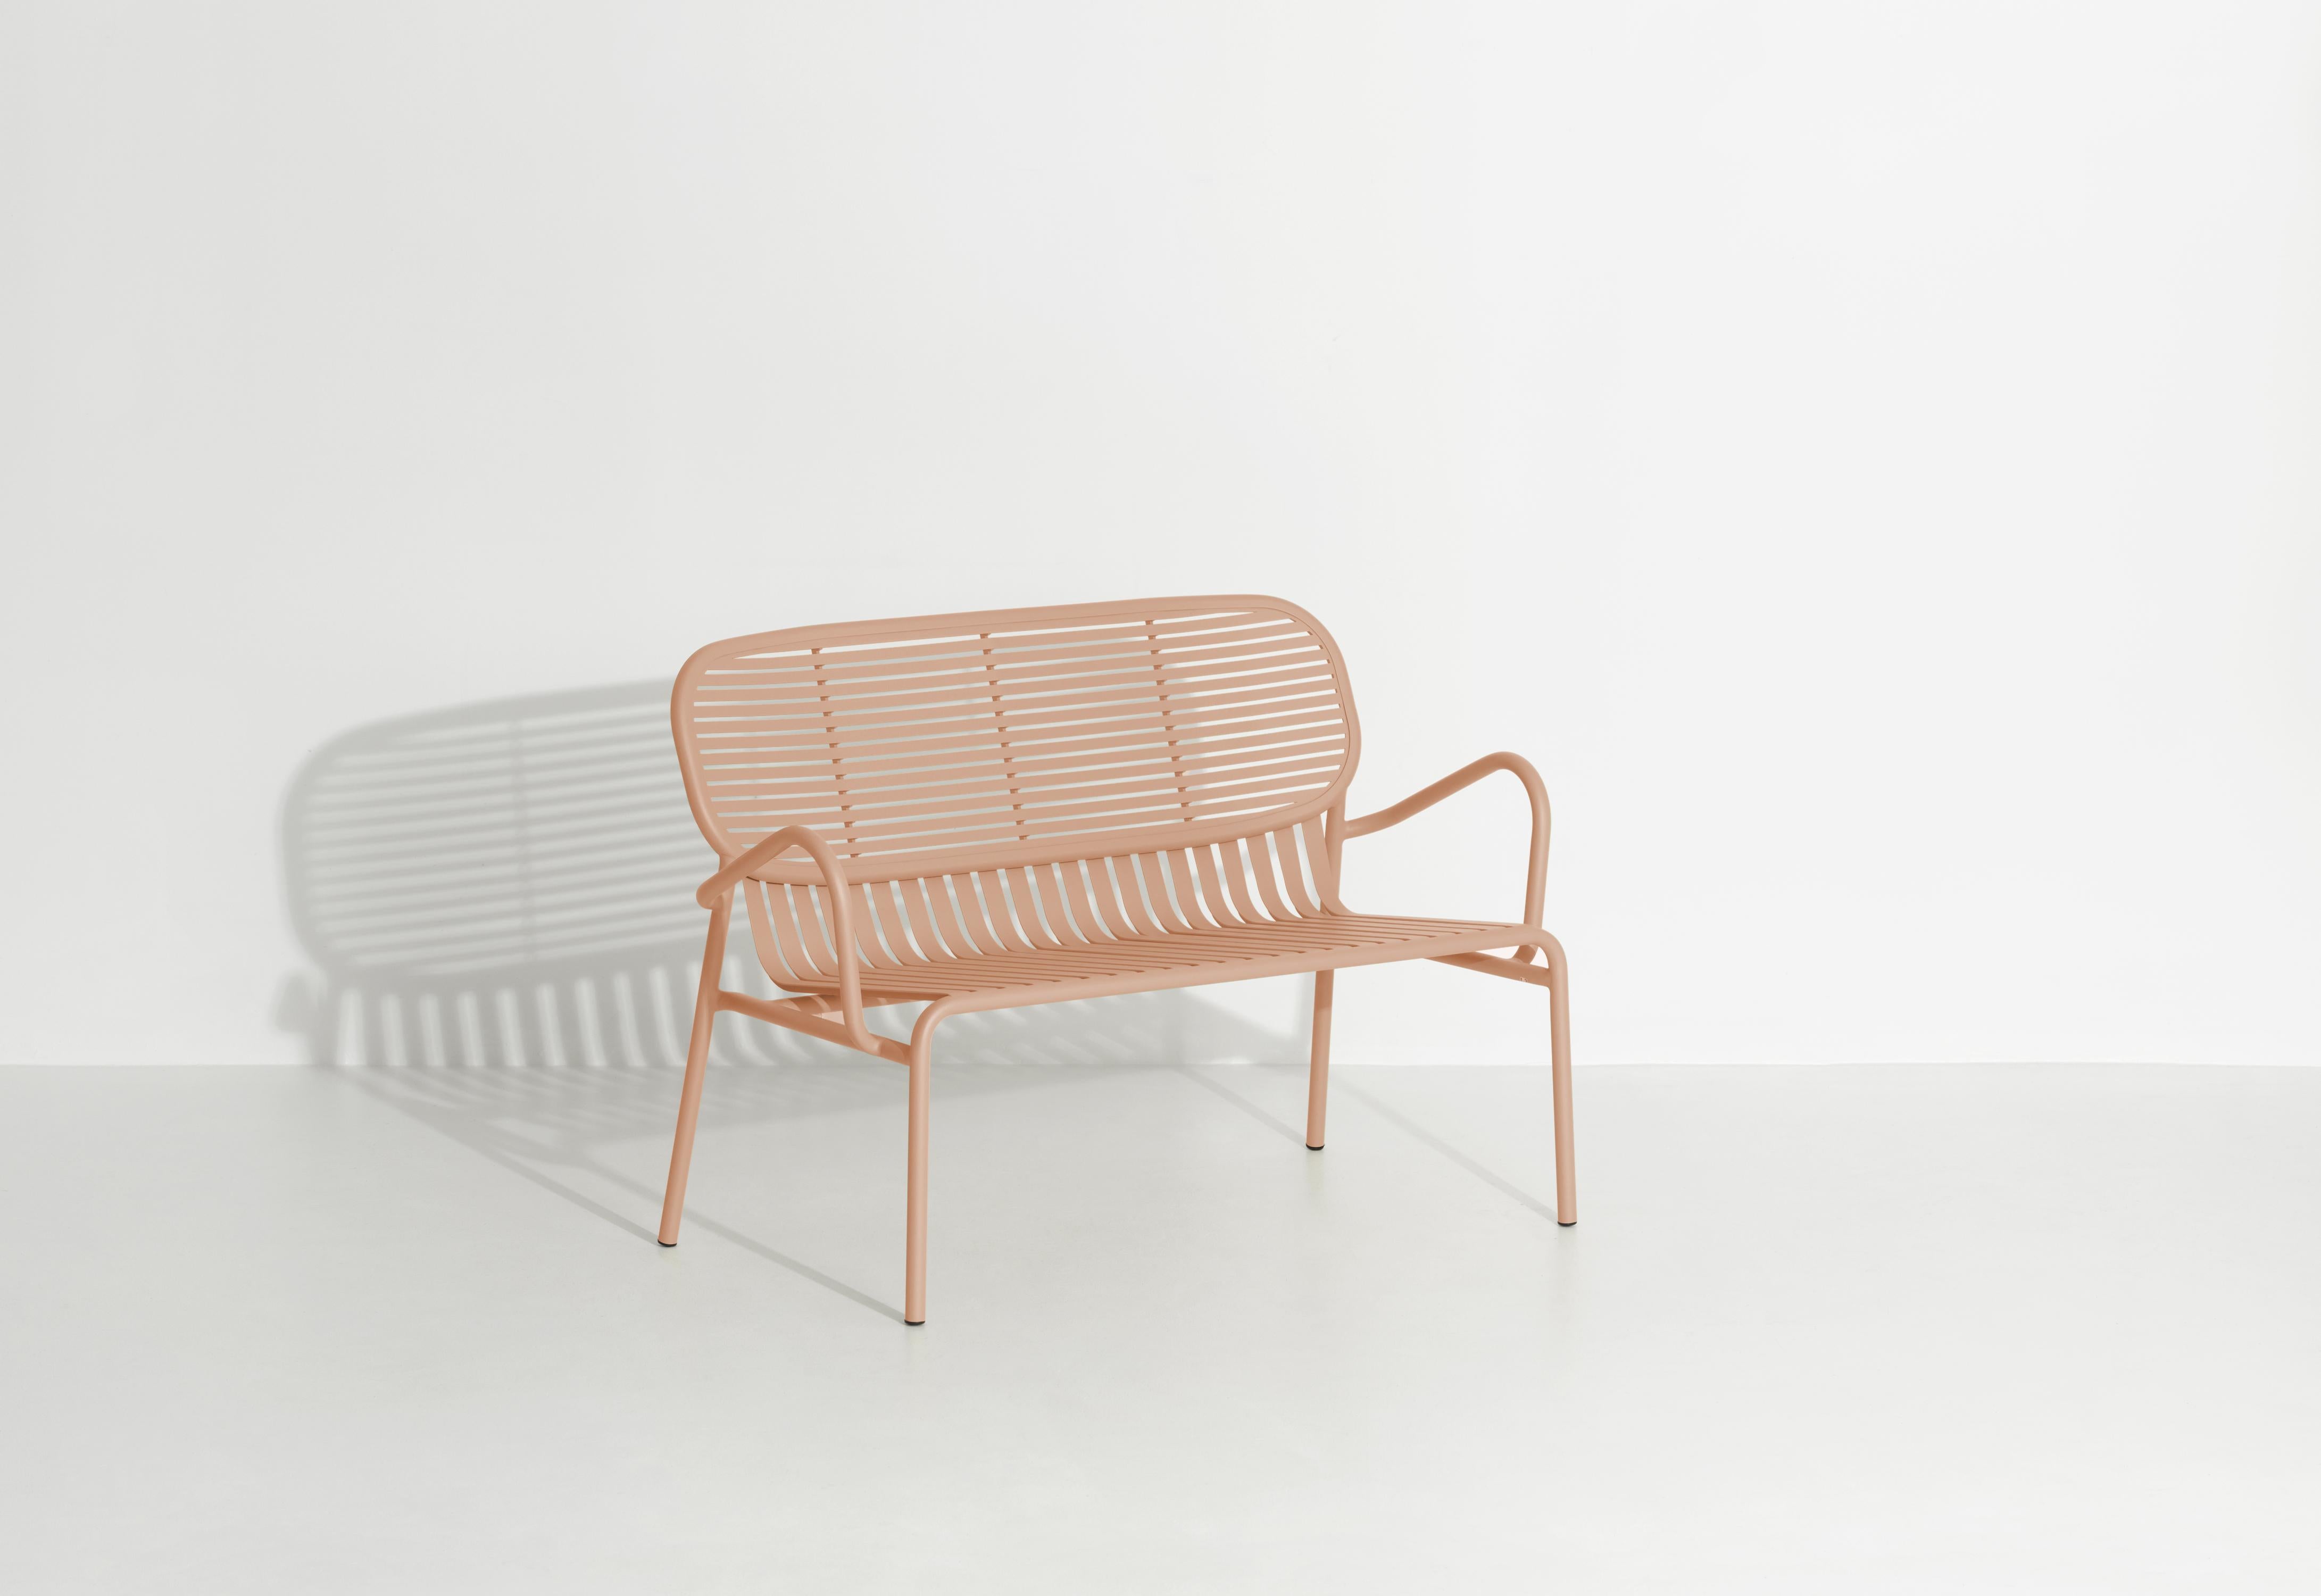 Petite Friture Week-End Sofa in Blush Aluminium by Studio BrichetZiegler In New Condition For Sale In Brooklyn, NY